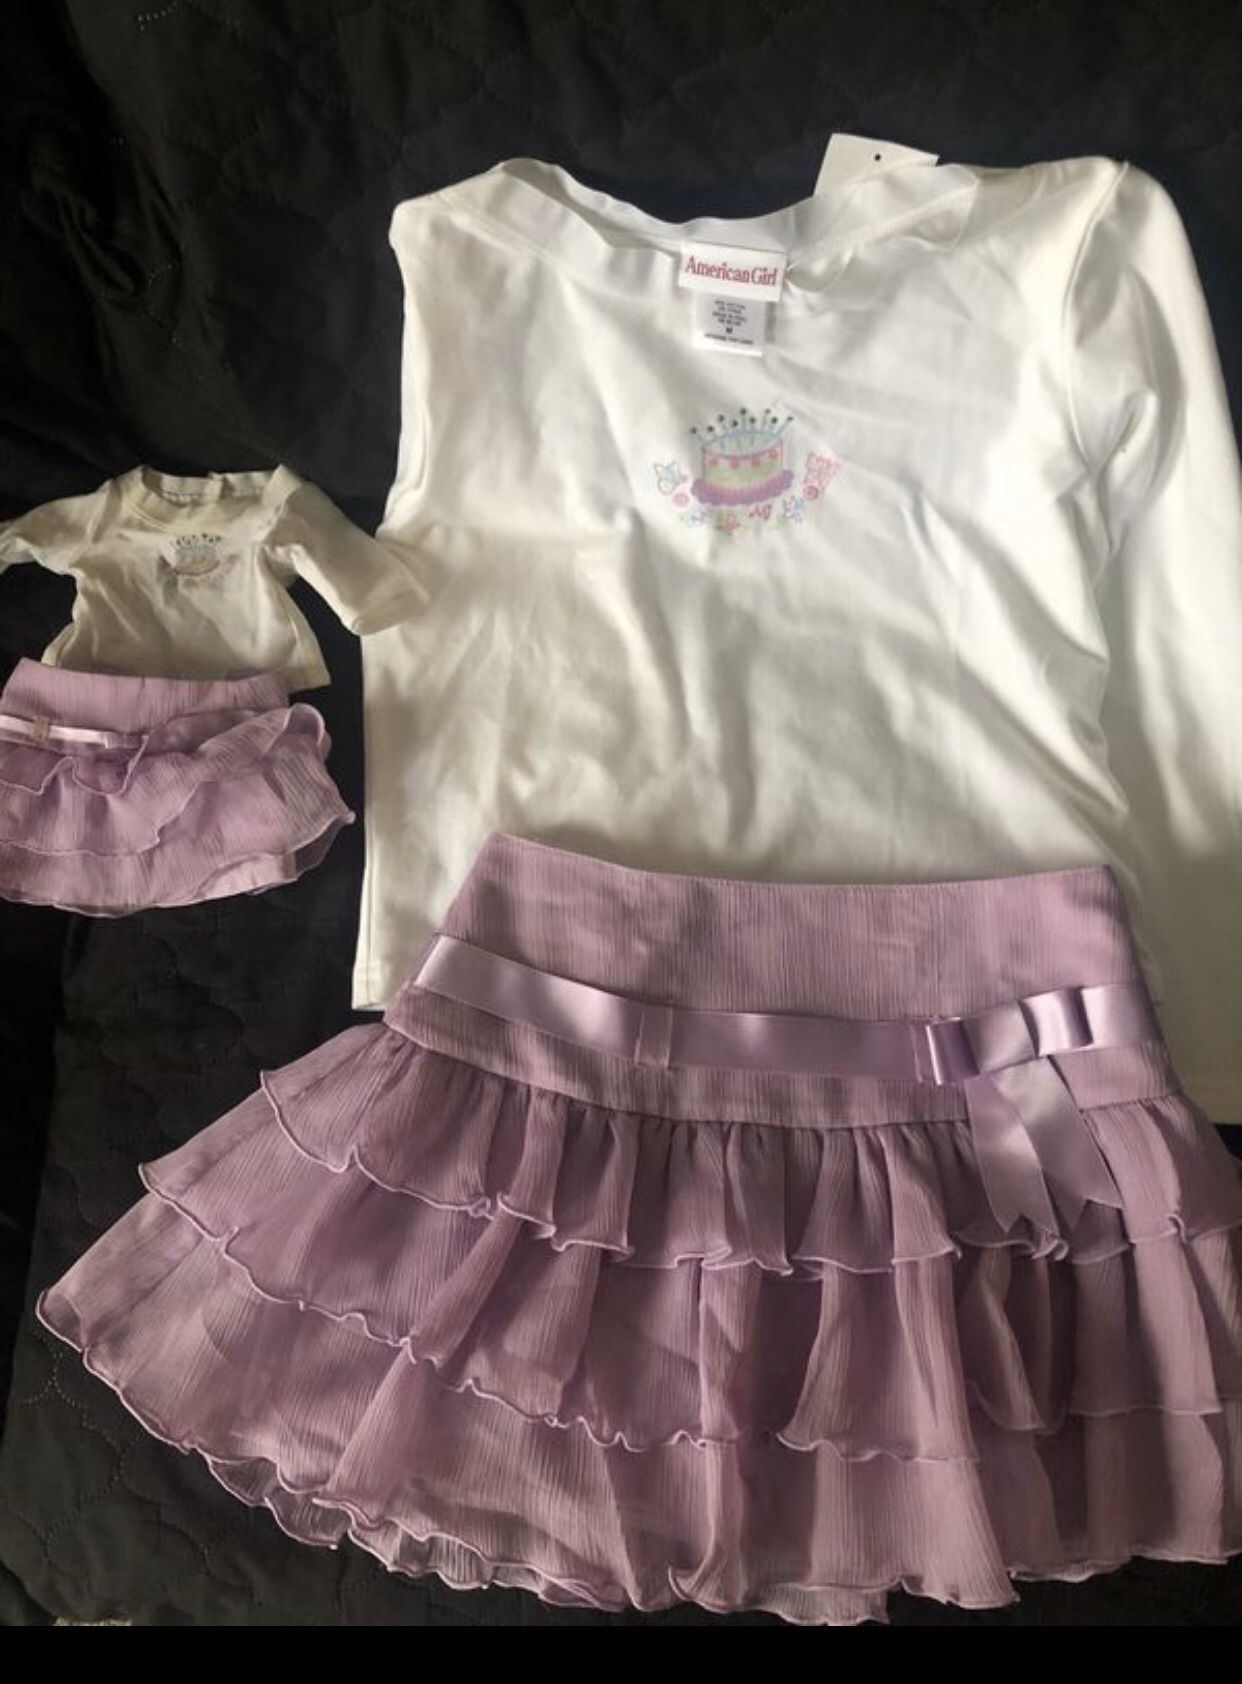 American Girl Birthday Outfit